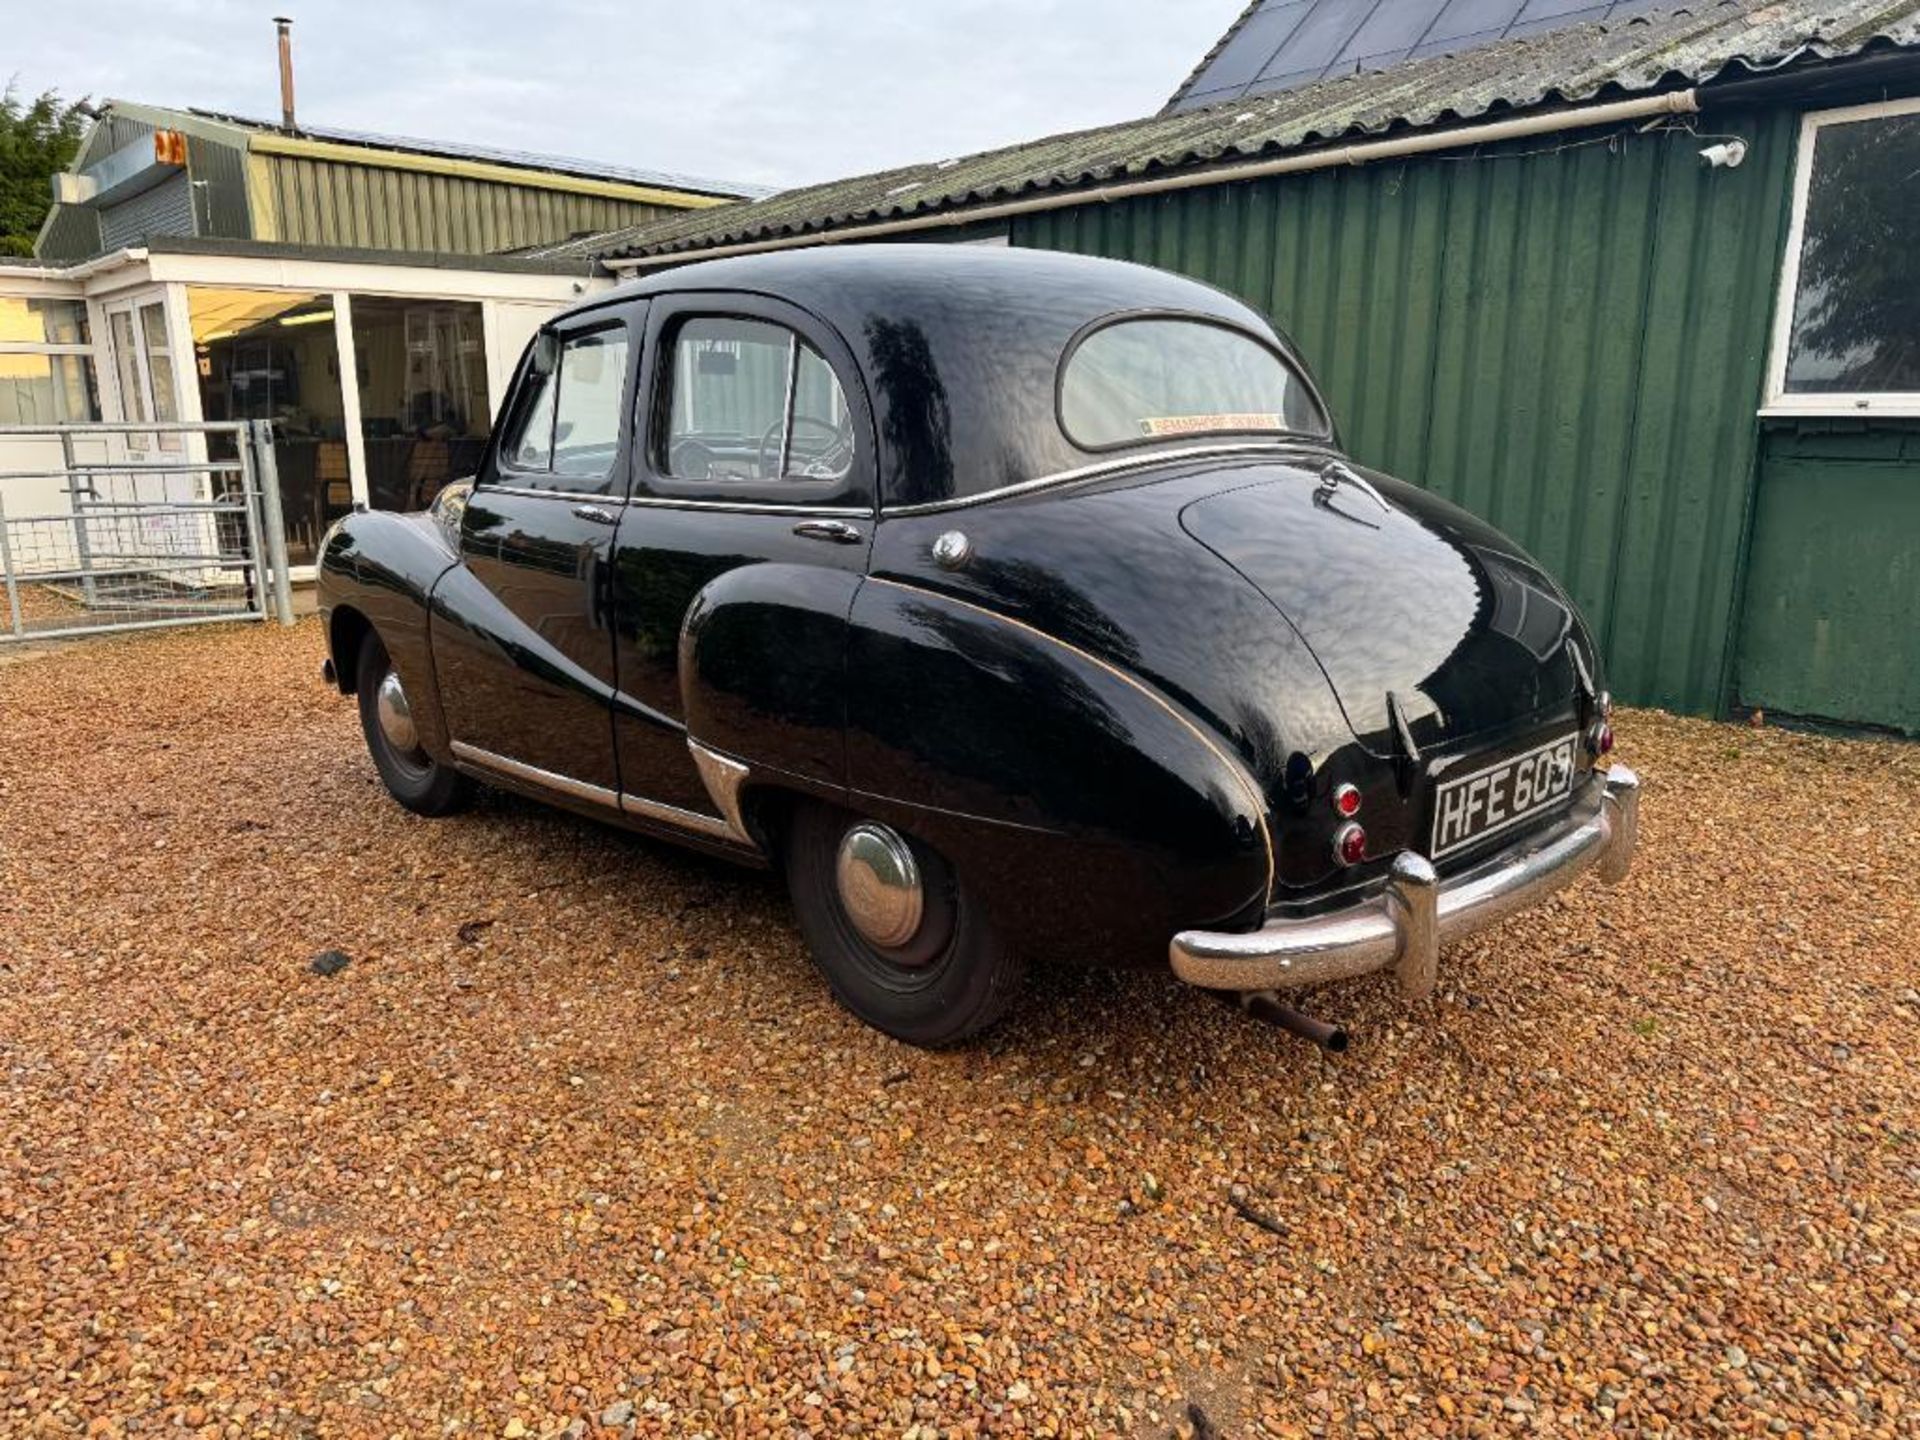 1954 Austin A40 Somerset black saloon car with 1200cc petrol engine, red leather interior and spare - Bild 5 aus 24